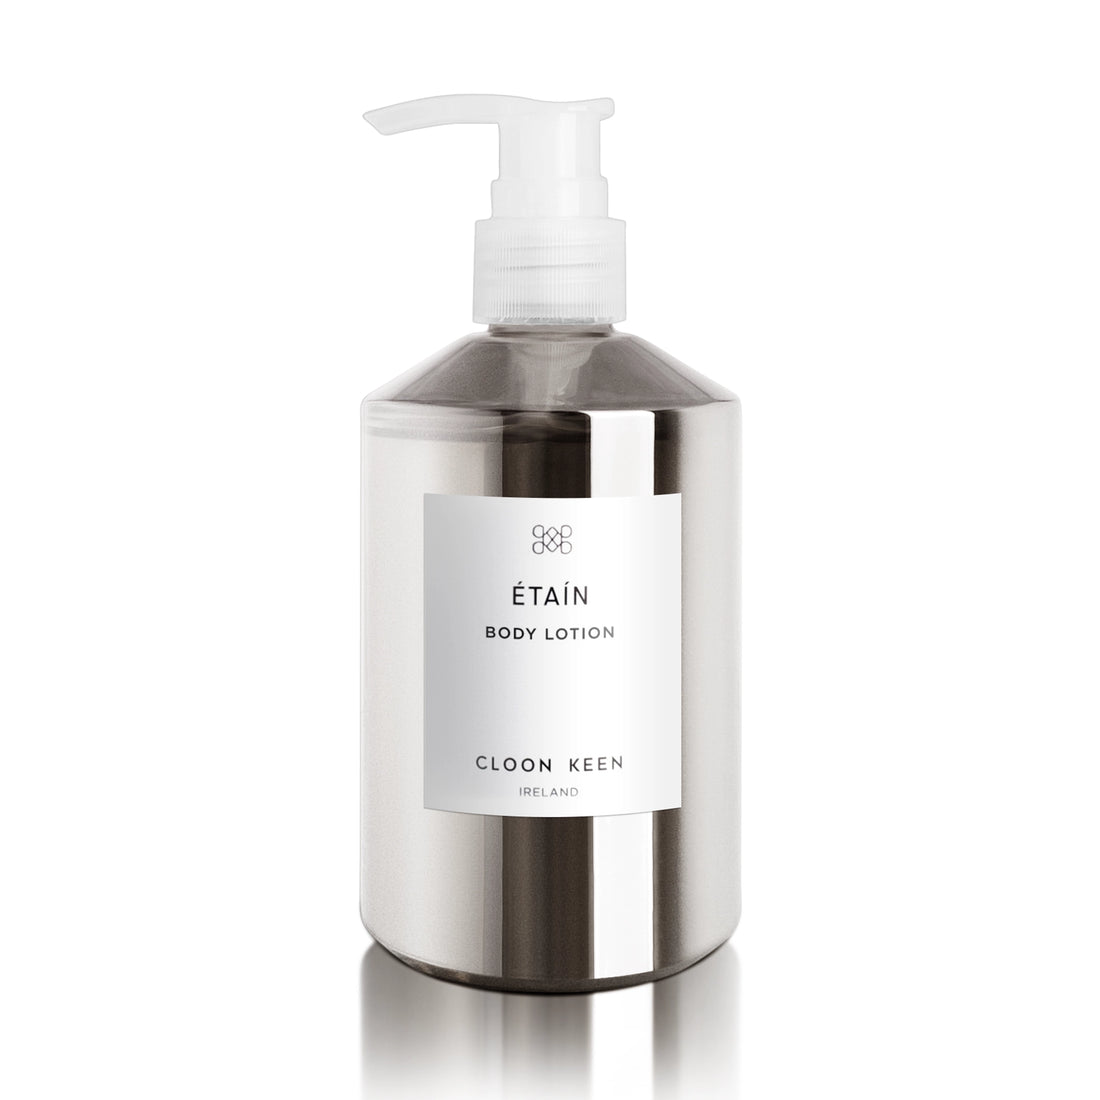 Image of Etain Body Lotion in semi-opaque silver bottle with pump dispenser. 